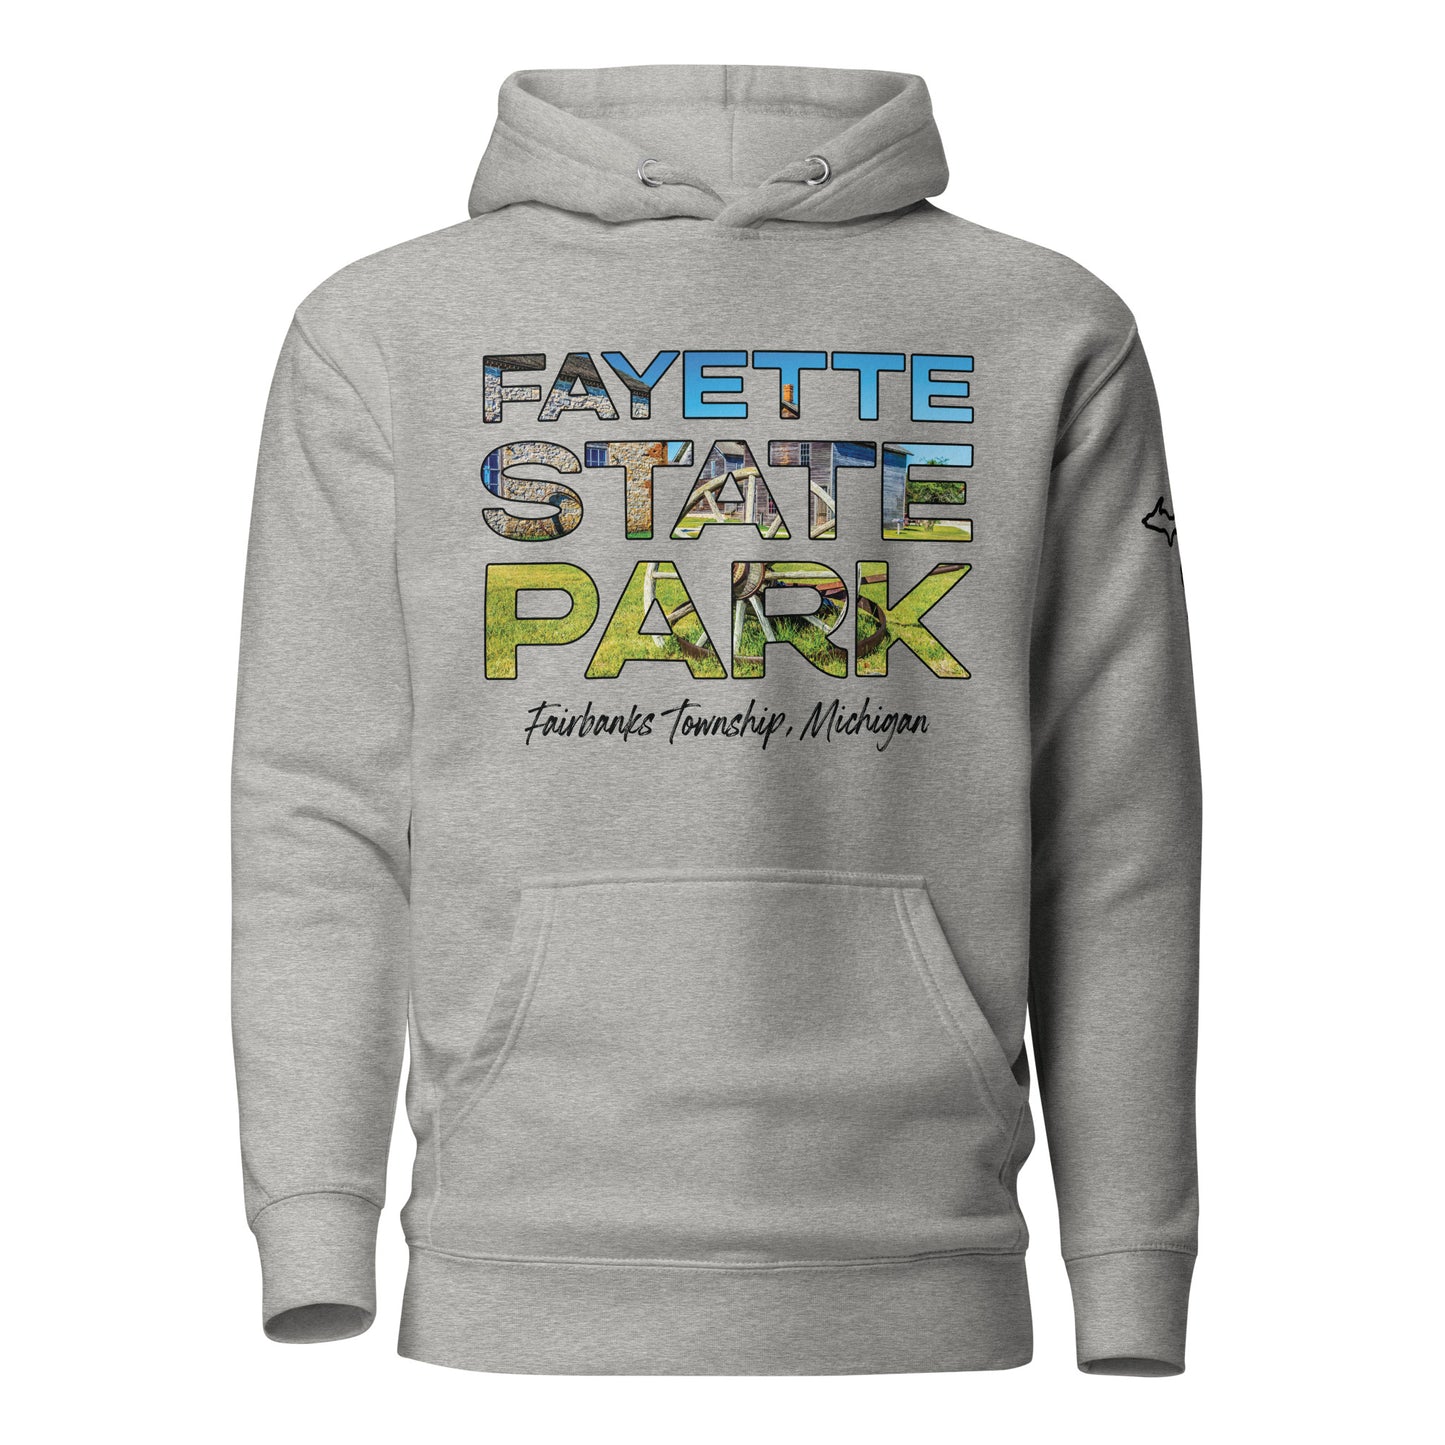 Fayette Historic State Park, Michgian - Unisex Hoodie